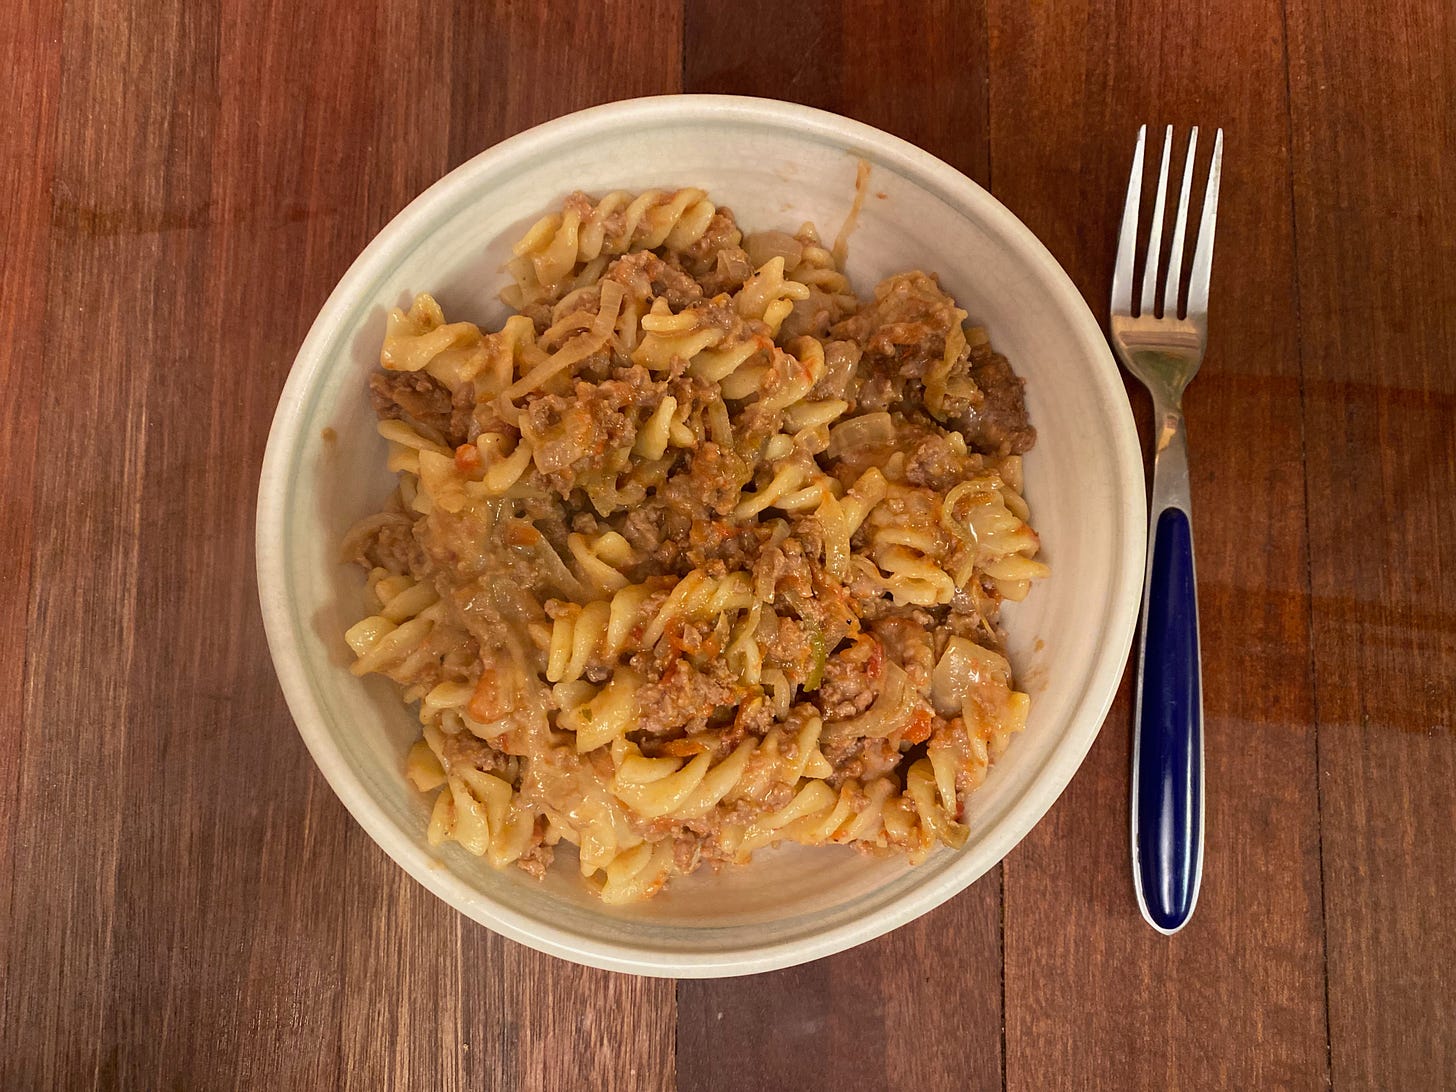 A white ceramic bowl filled with fusilli pasta tossed with a lamb tomato sauce. A fork sits on the wooden counter next to the bowl.